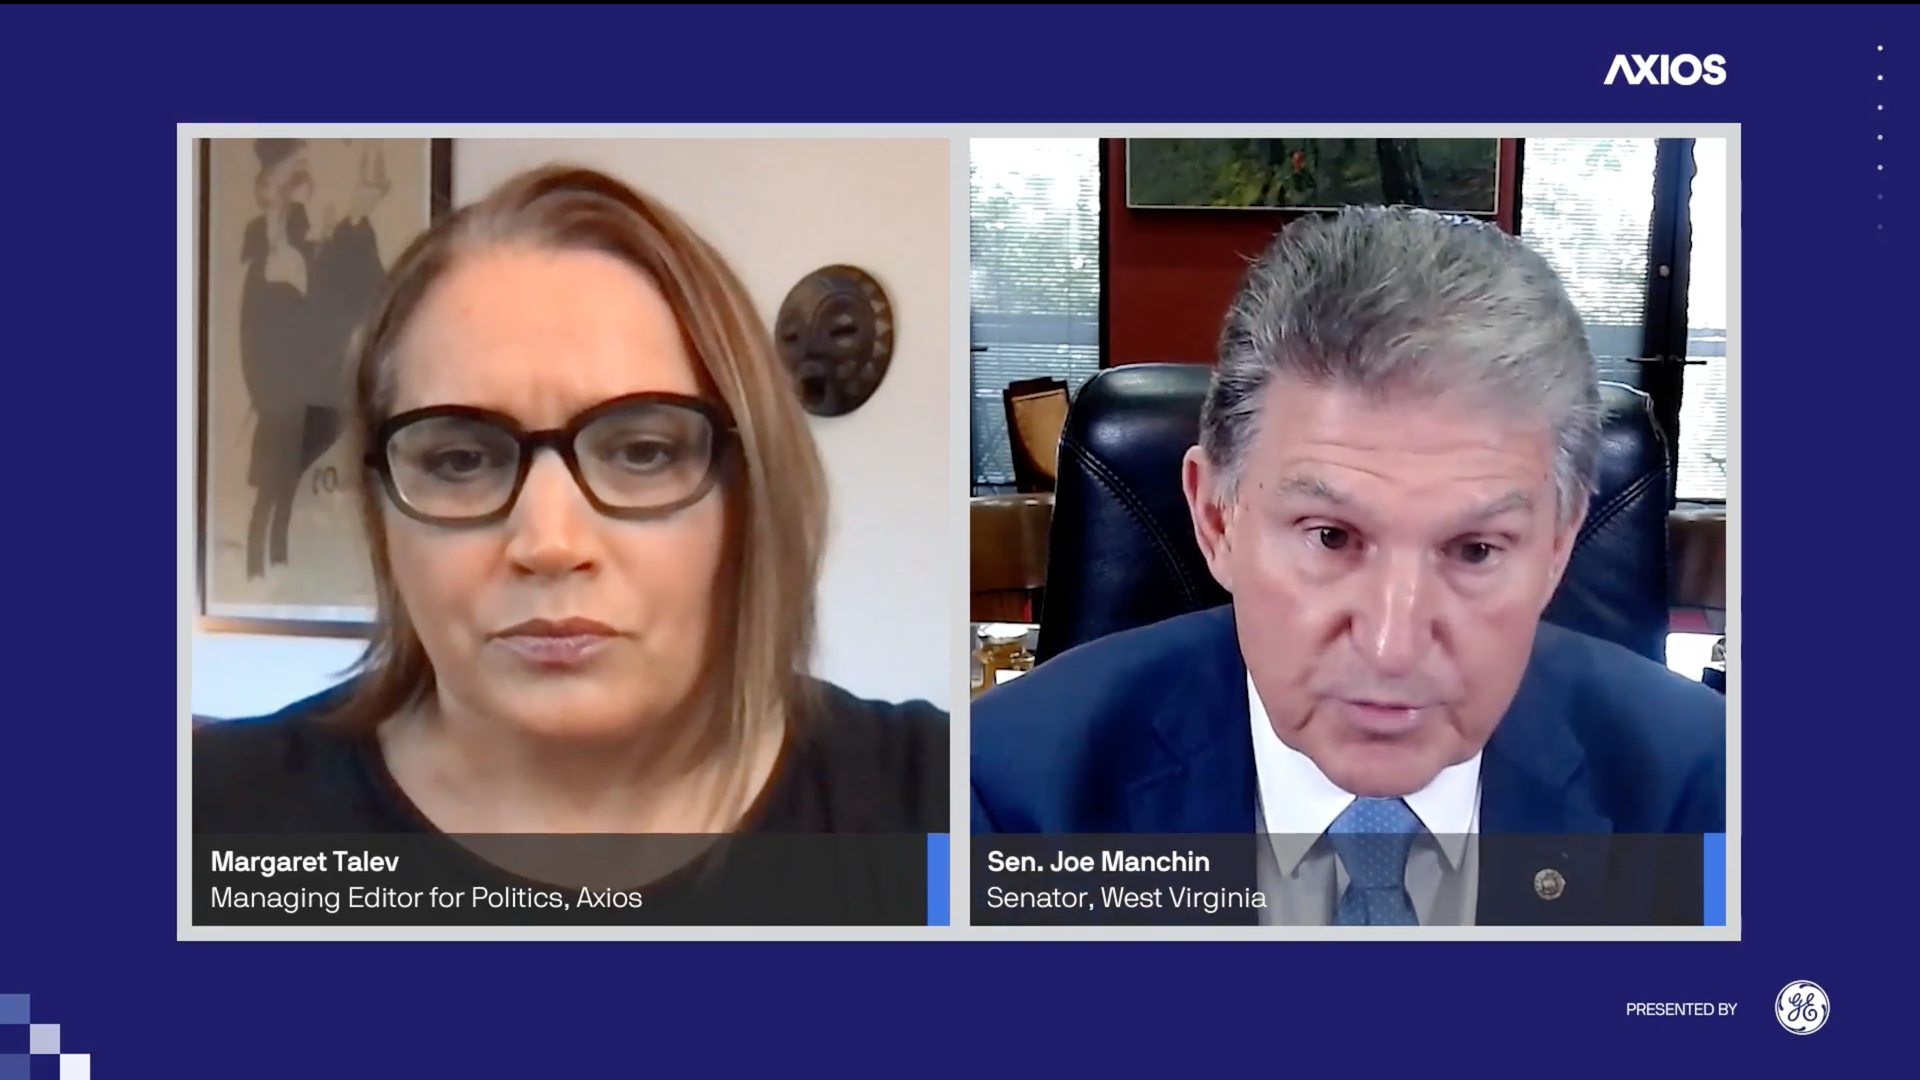 Screenshot of Axios event, Axios' margaret Talev on the left and Sen. Joe Manchin on the right